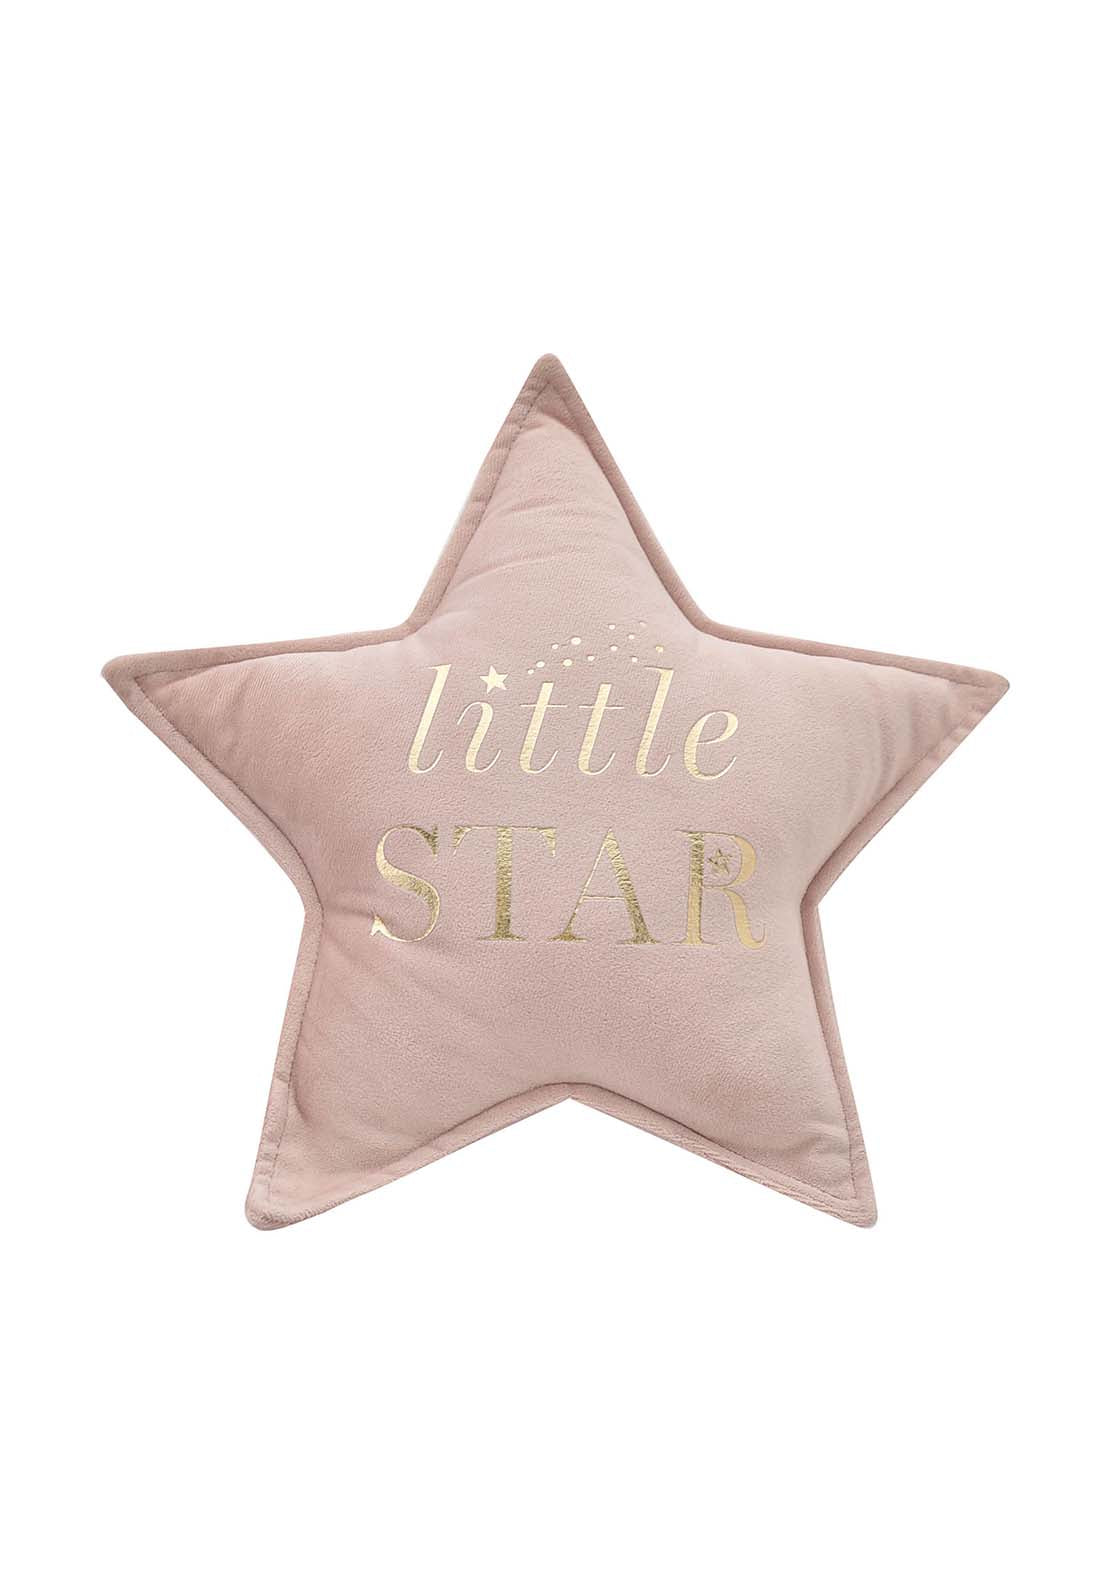 The Home Collection Little Star Velvet Cushion 30cm 1 Shaws Department Stores